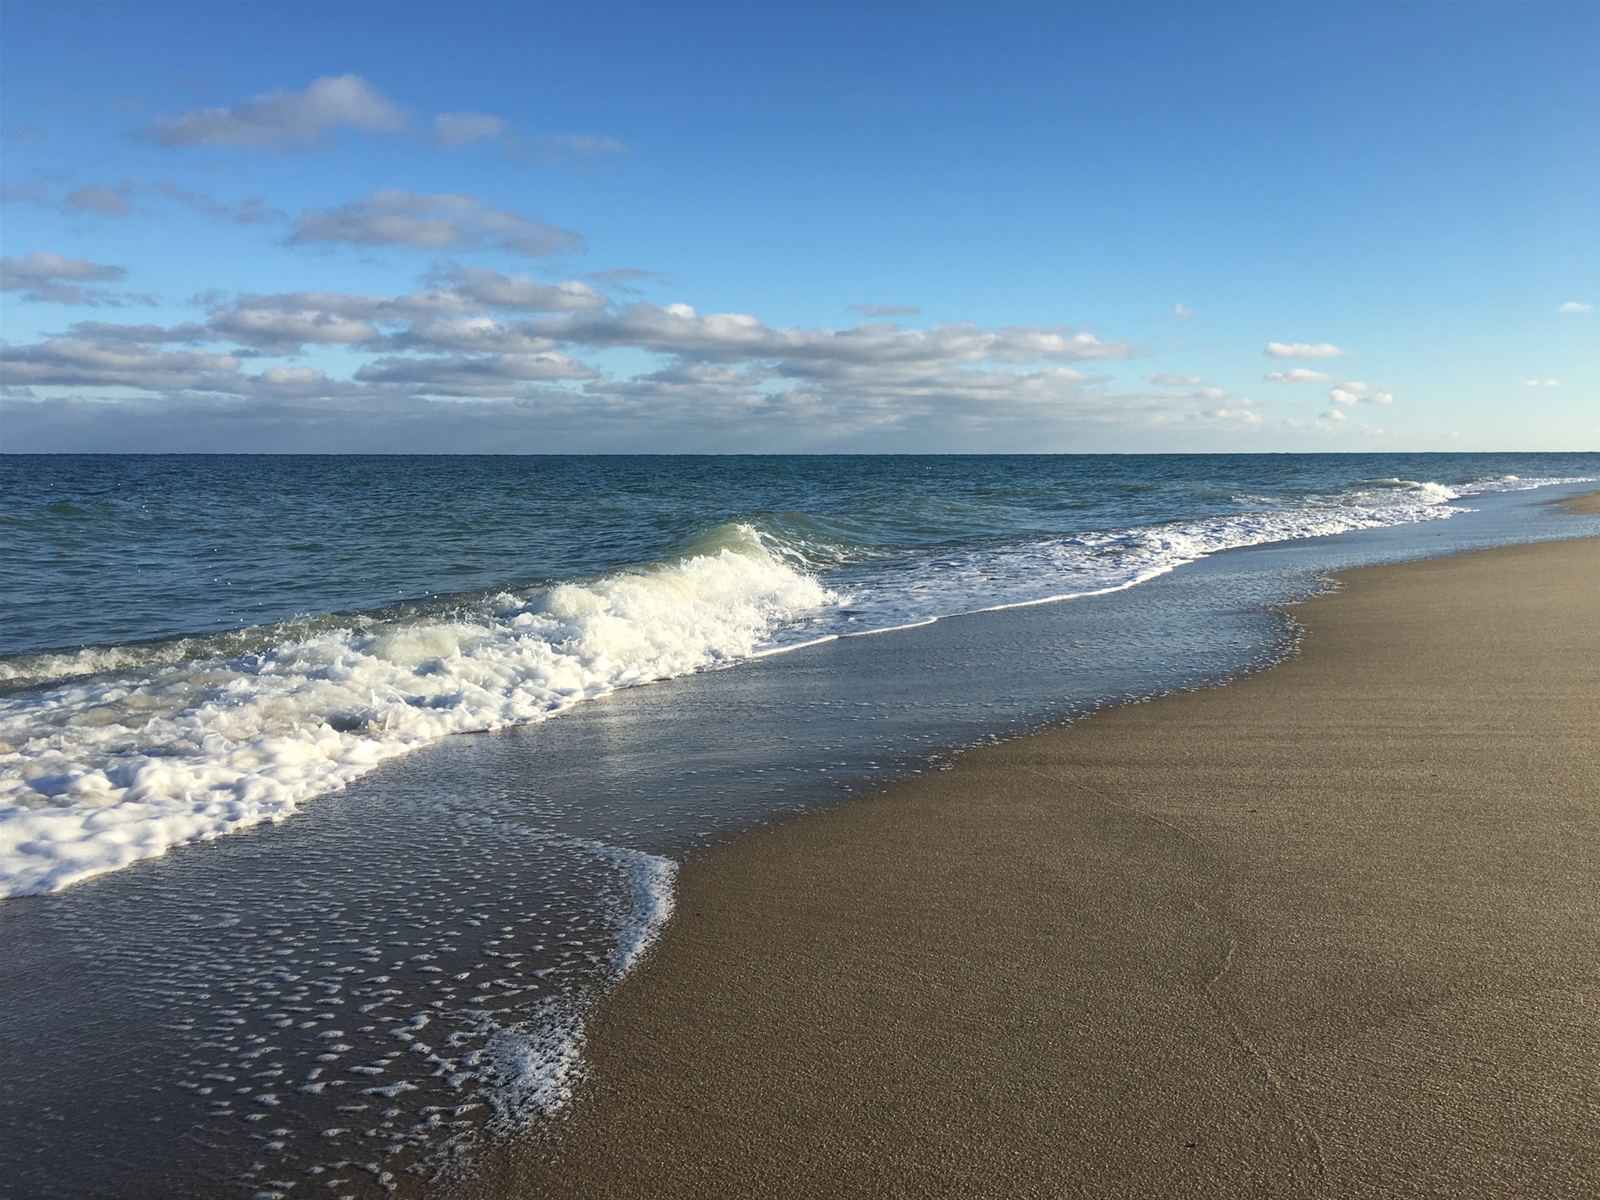 Voted one of the best beaches on the Cape, Nauset Beach in Orleans is a popular destination for tourists.